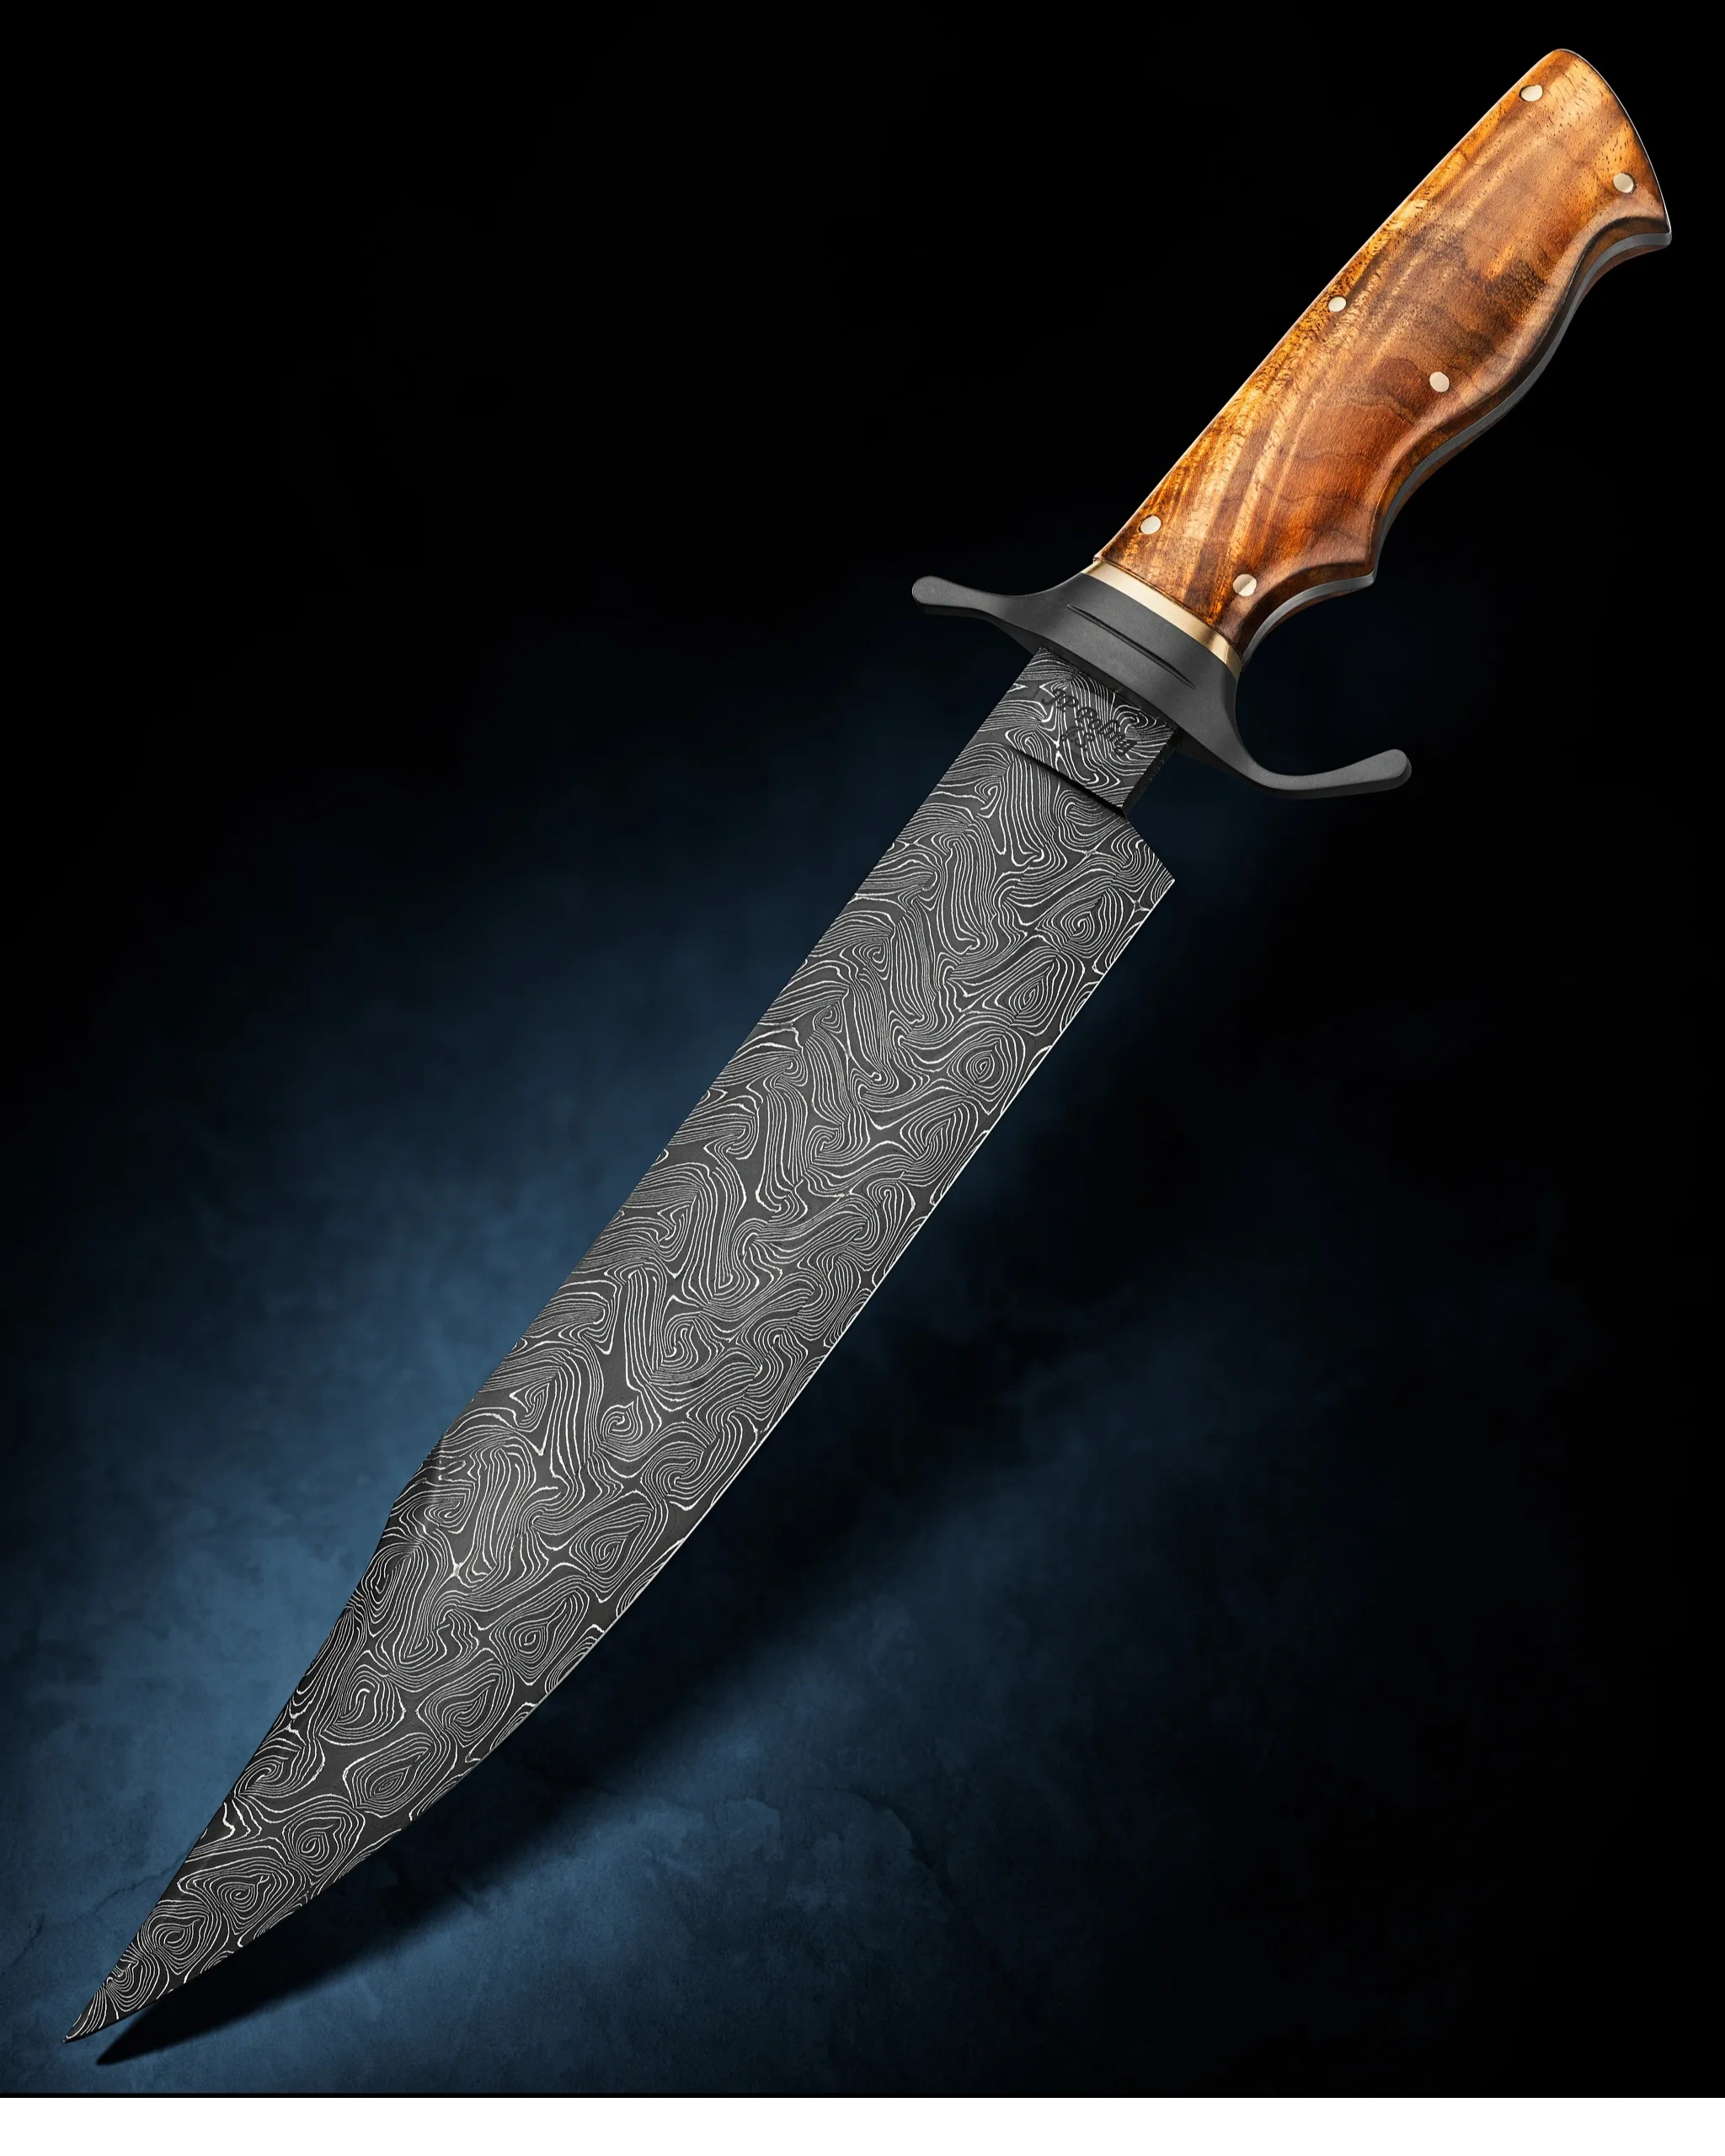 Bowie Knife by Jim Poling, J.S.